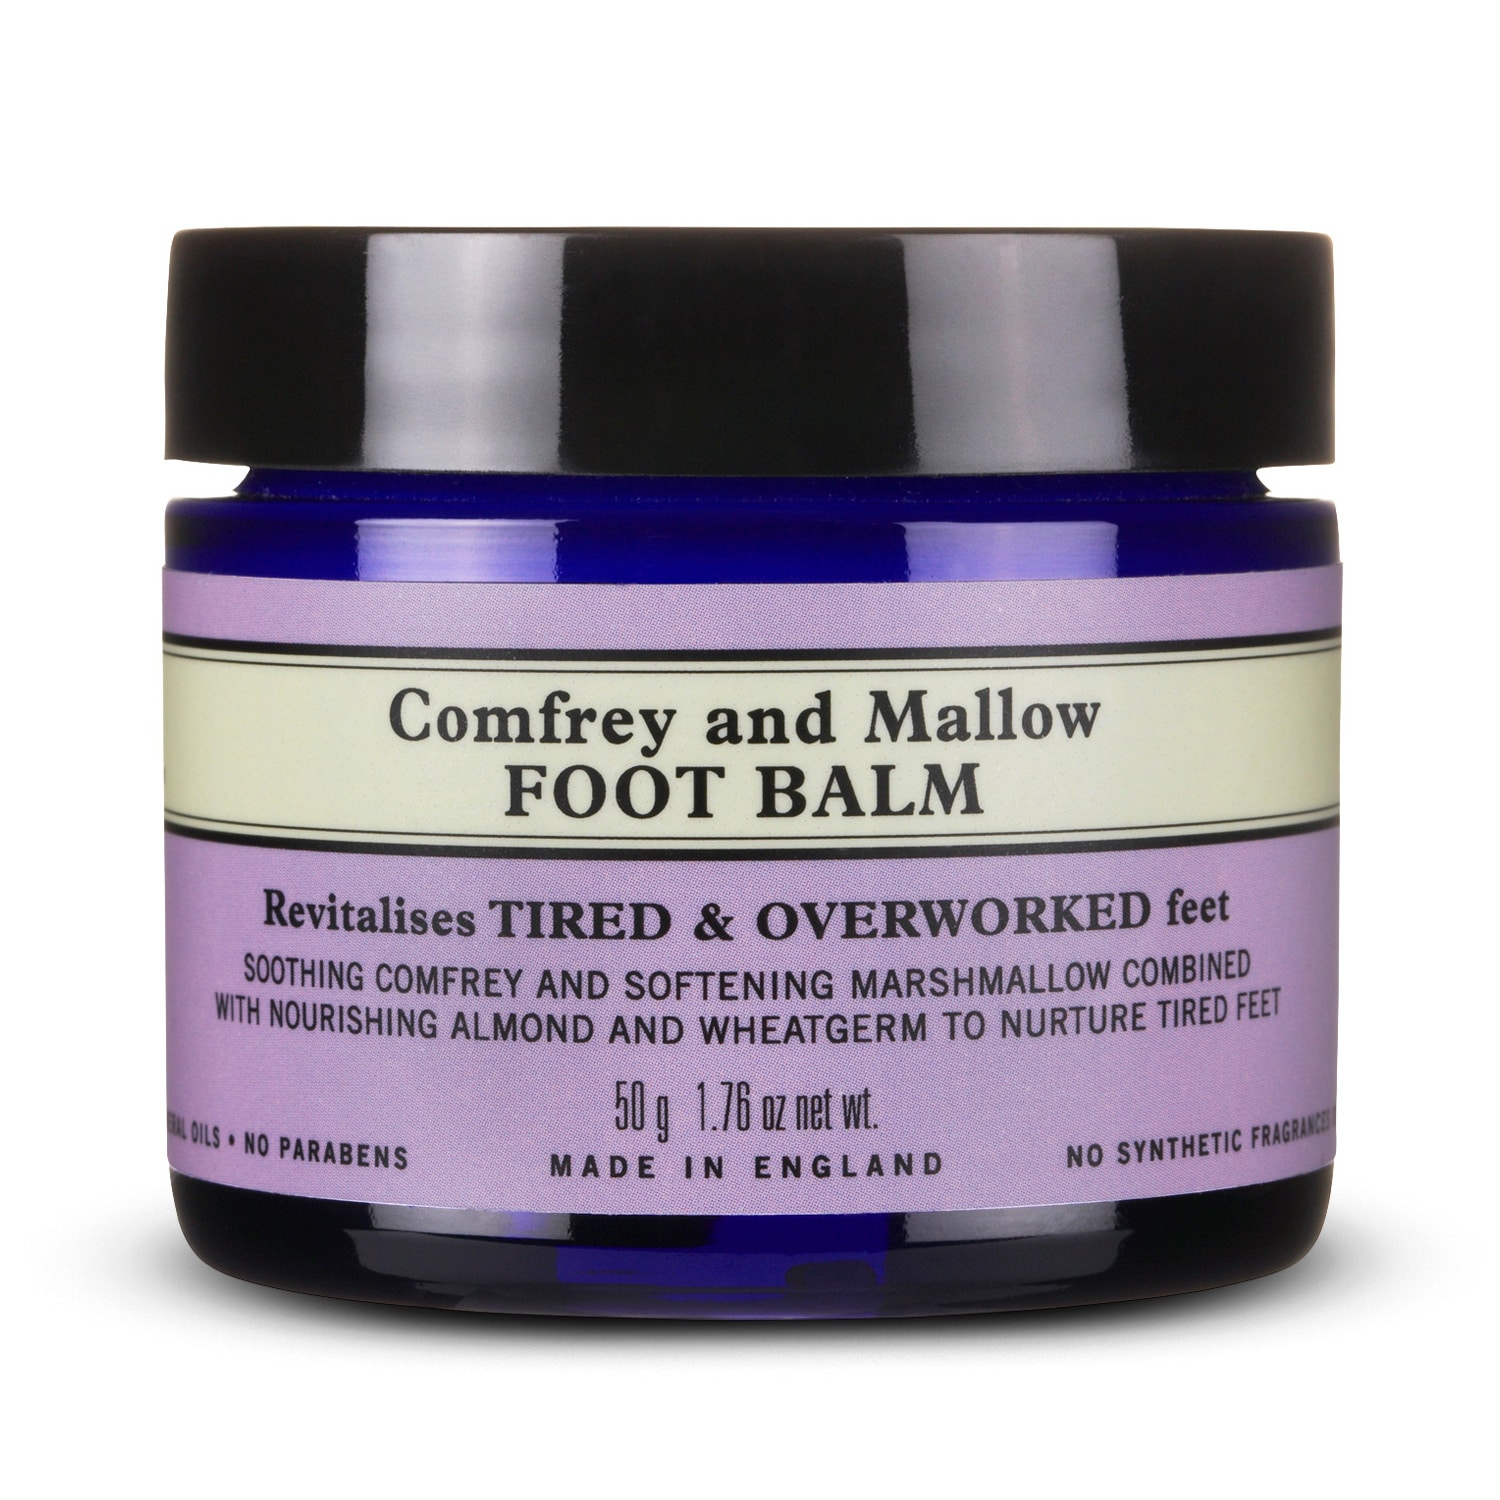 Neal's Yard Remedies Comfrey and Mallow Foot Balm 50g